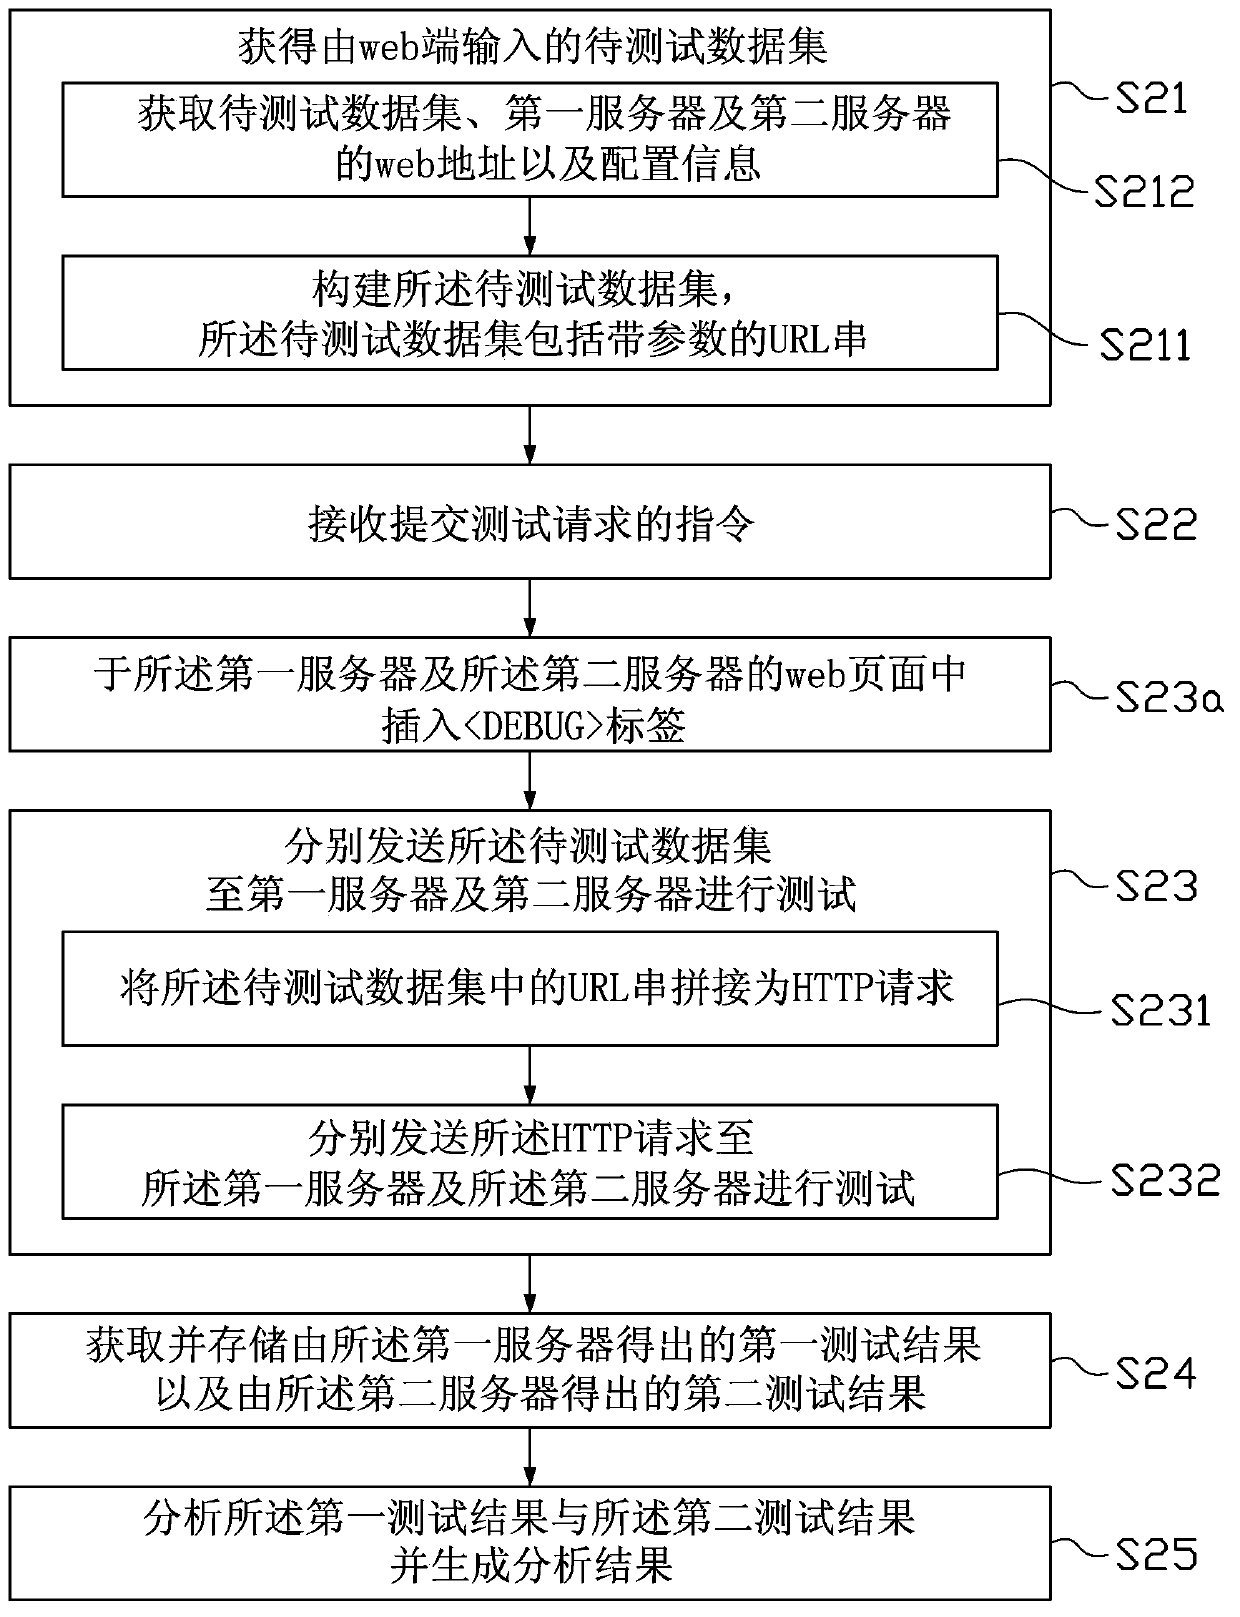 Web-based general Internet product data comparison test method and apparatus